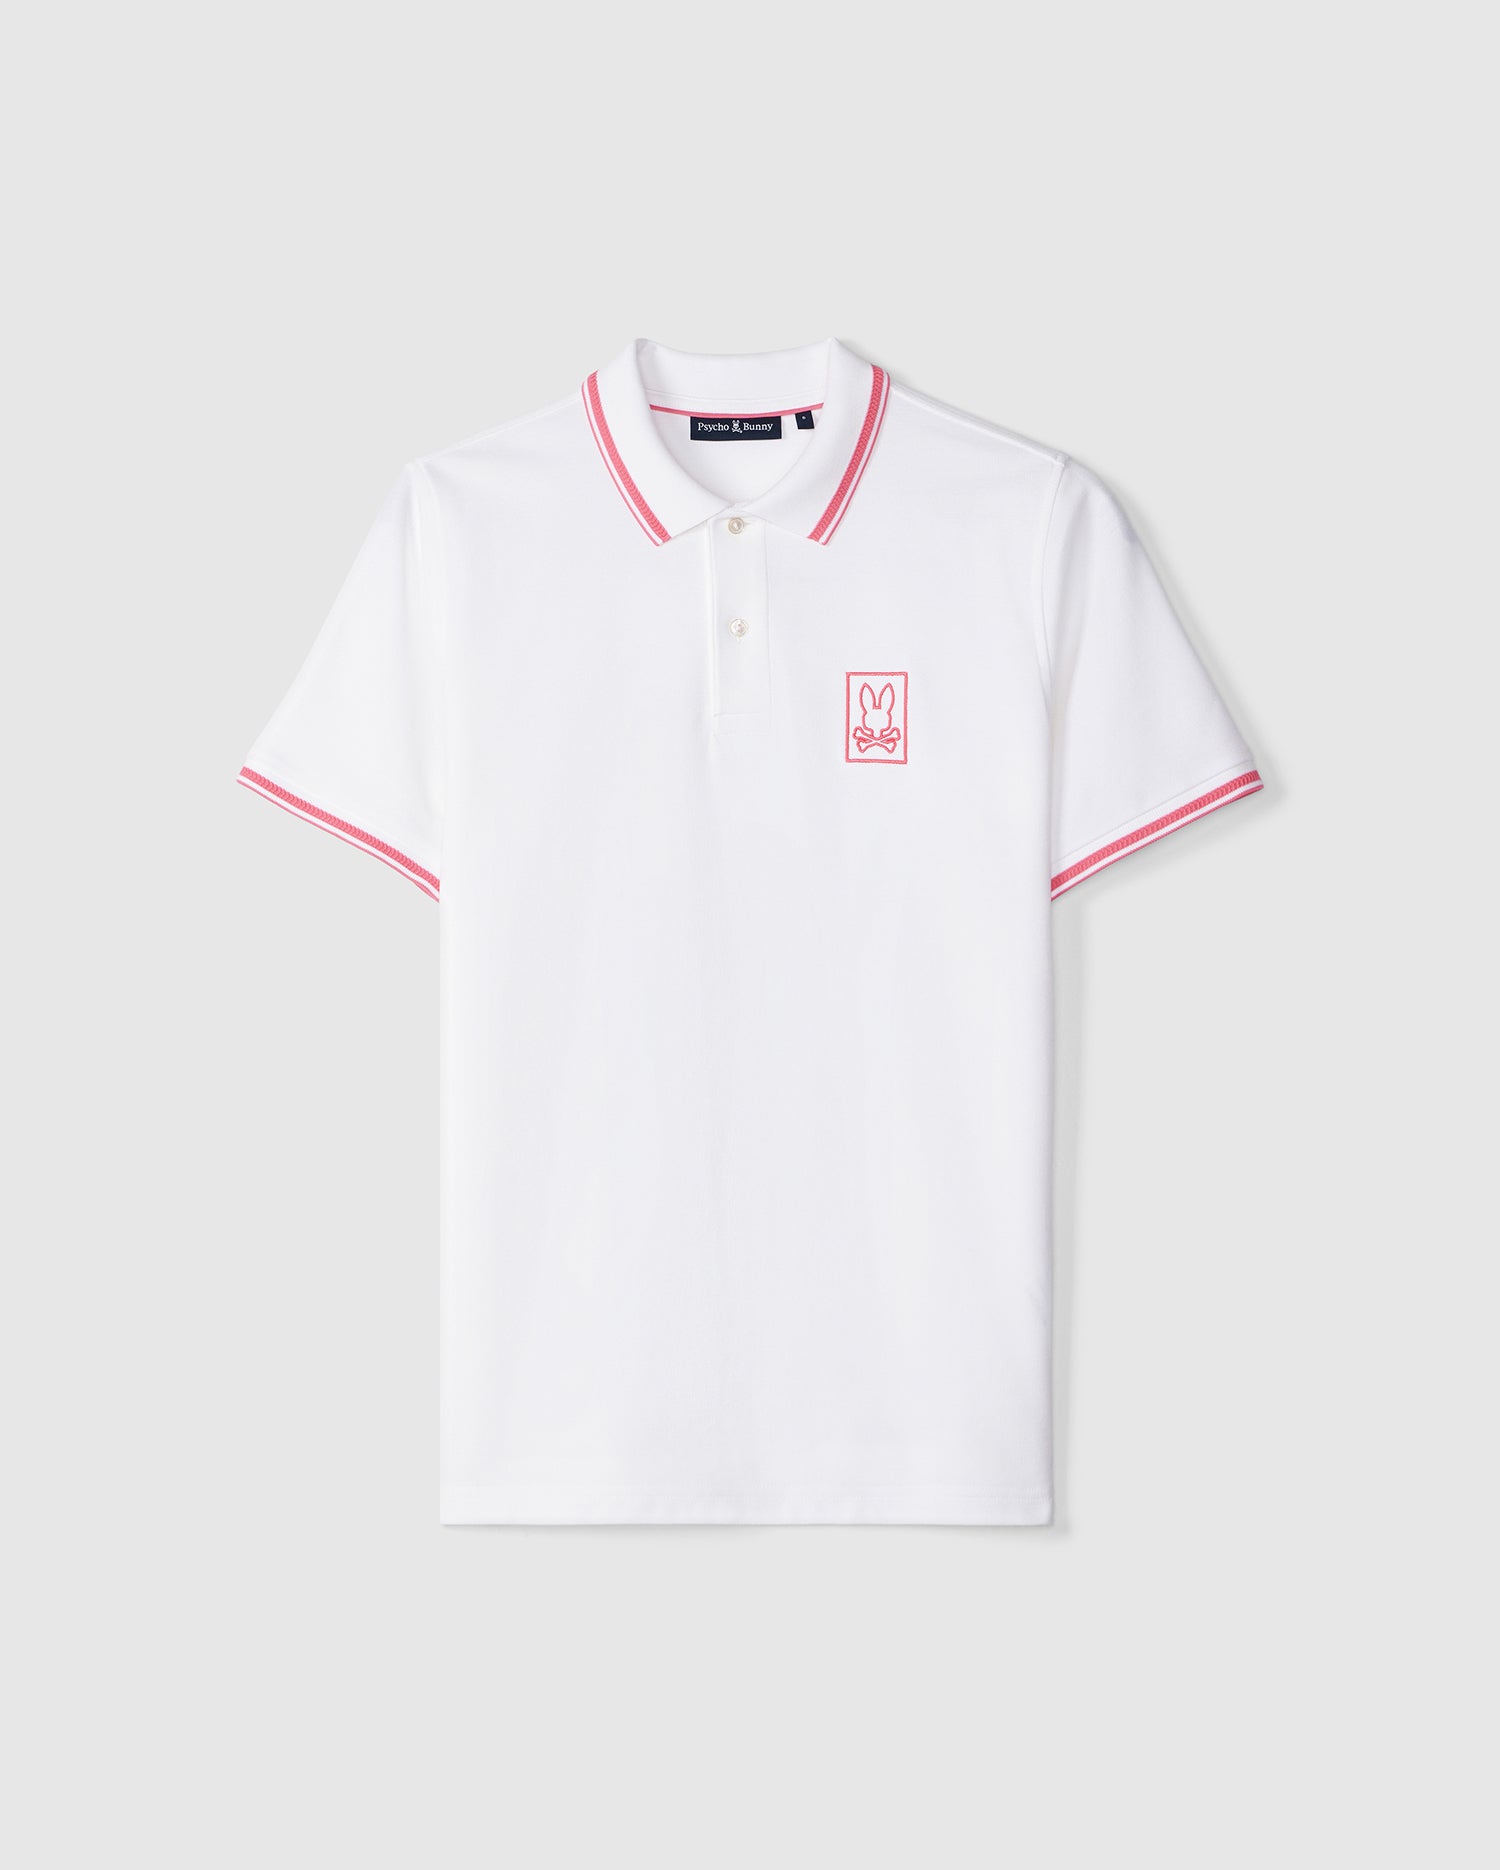 Psycho Bunny Men's Arcadia Pique Polo Shirt - B6K406B200, white shirt with red and navy trim on the collar and sleeves, featuring a small pink bunny logo on the left chest. The shirt is displayed against a plain, light background.